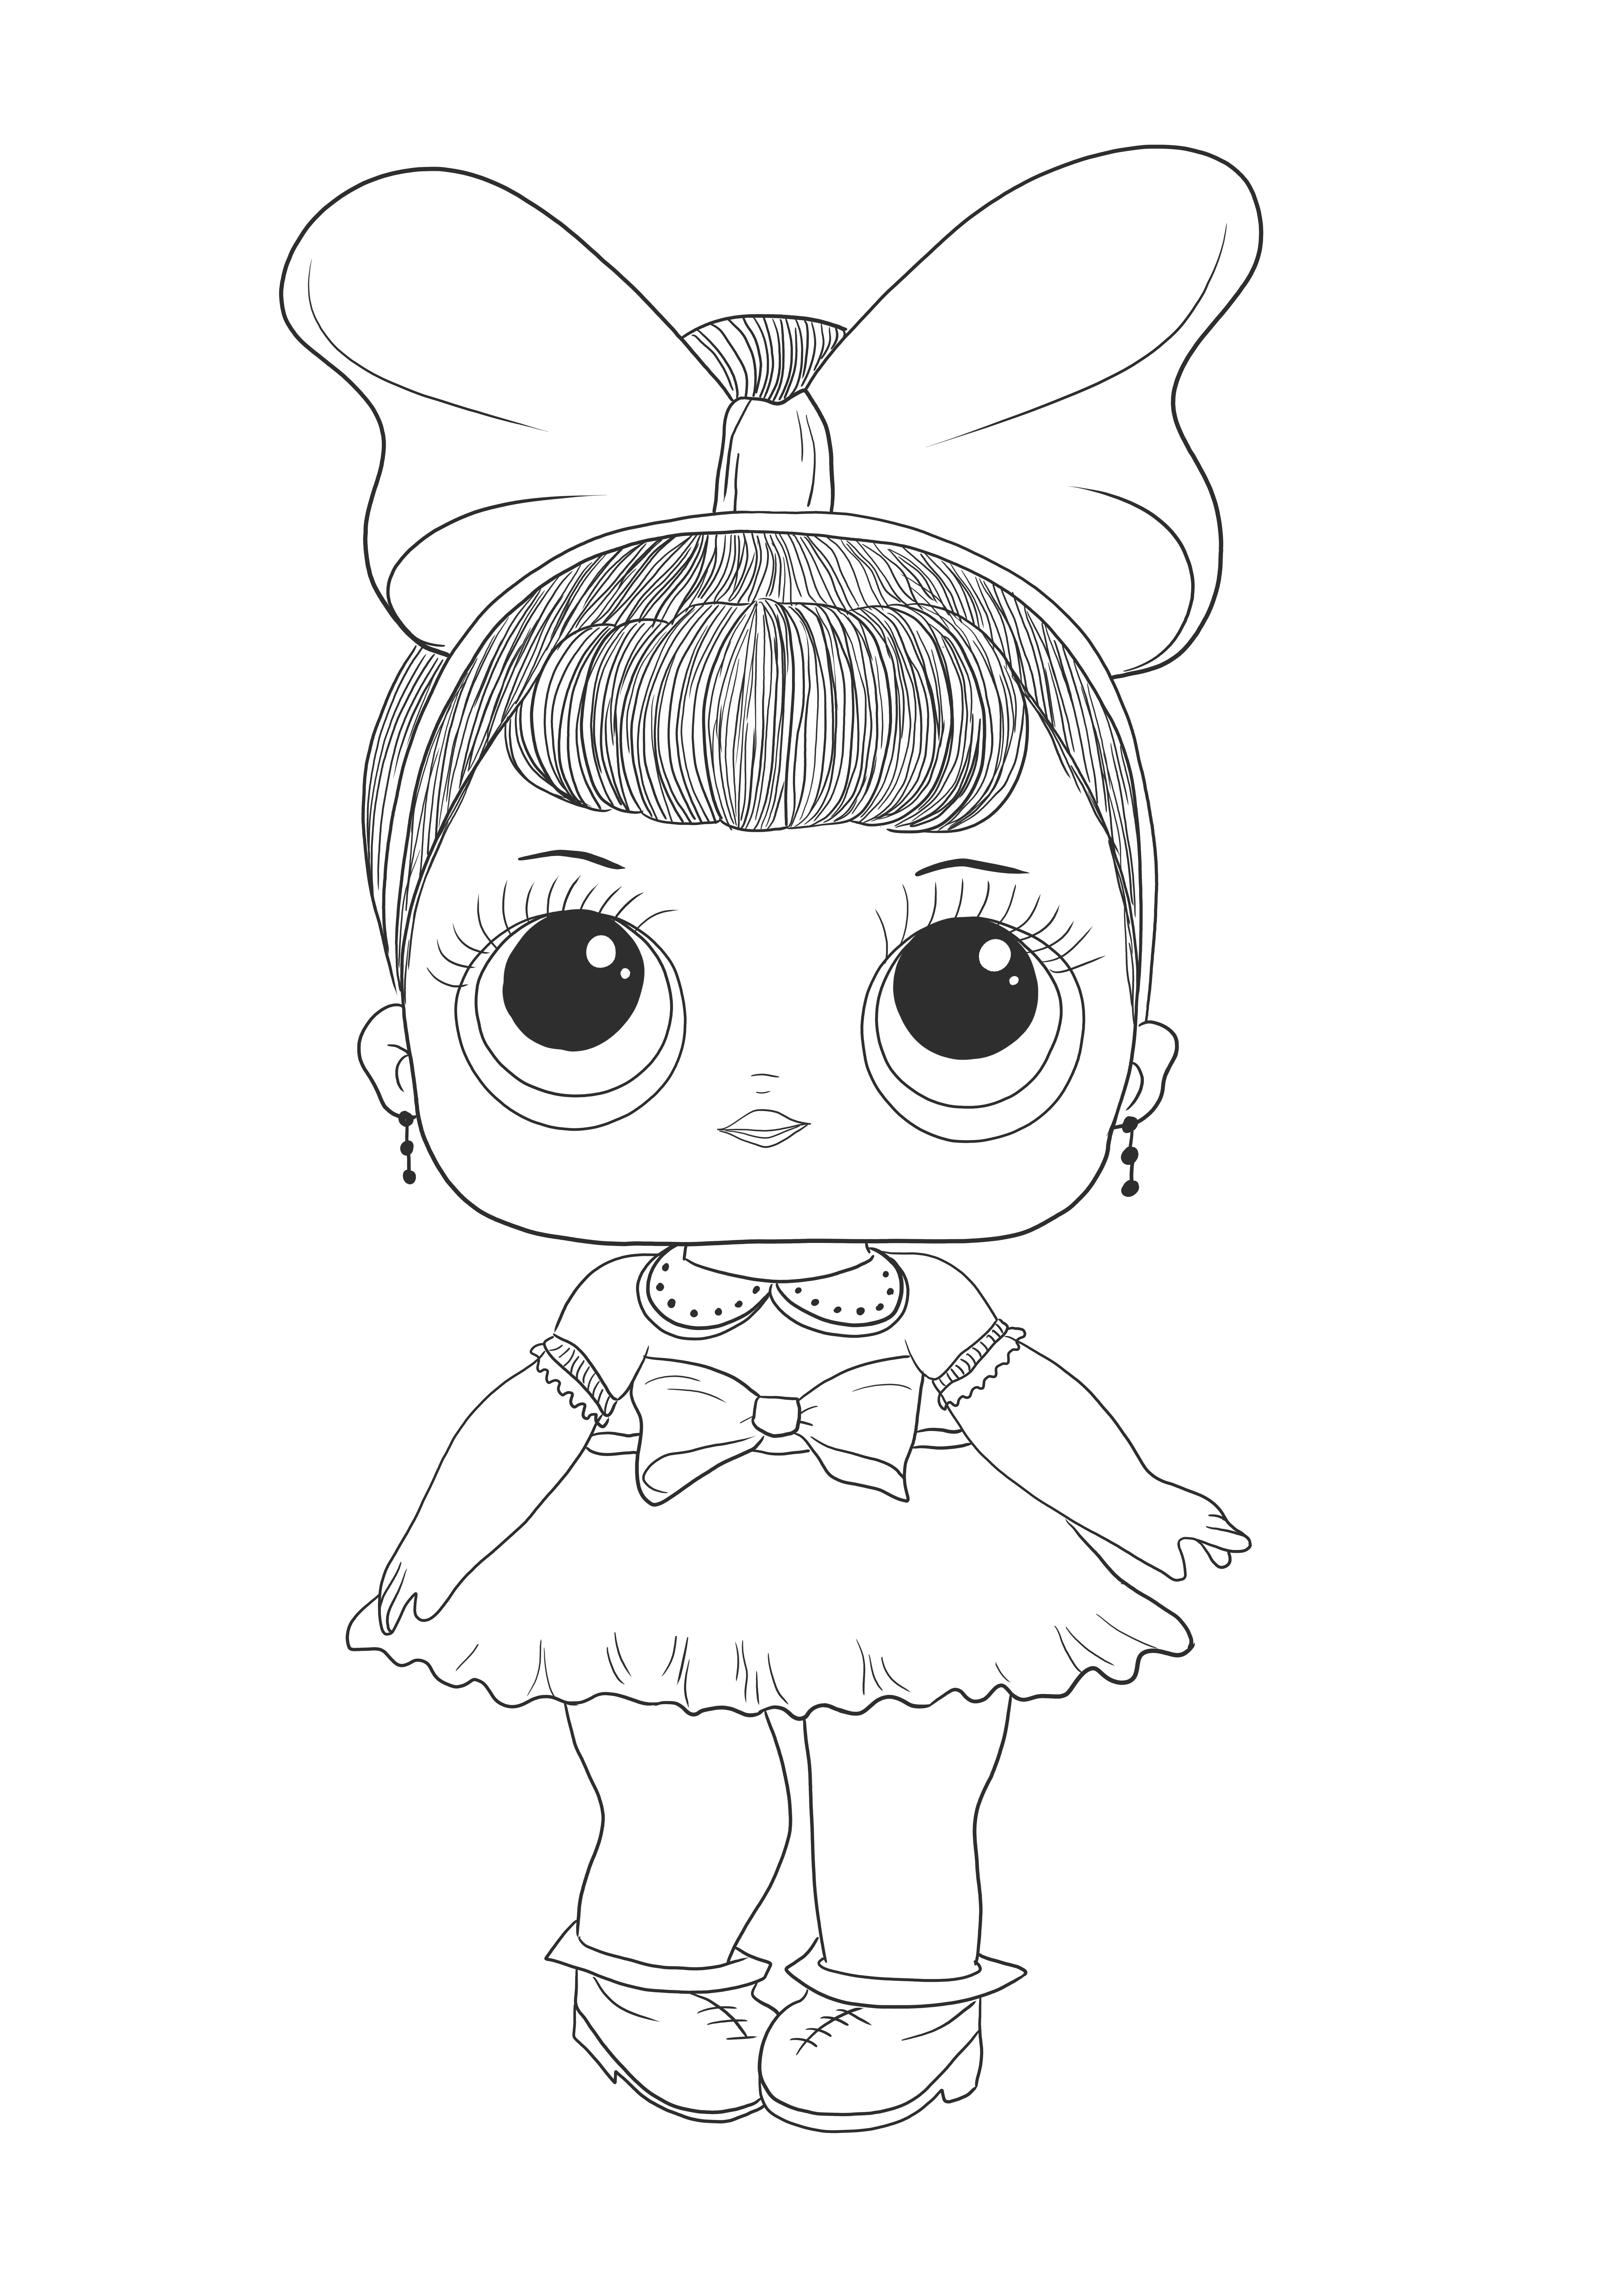 Fancy Glitter LOL Surprise Doll coloring sheet-free to print